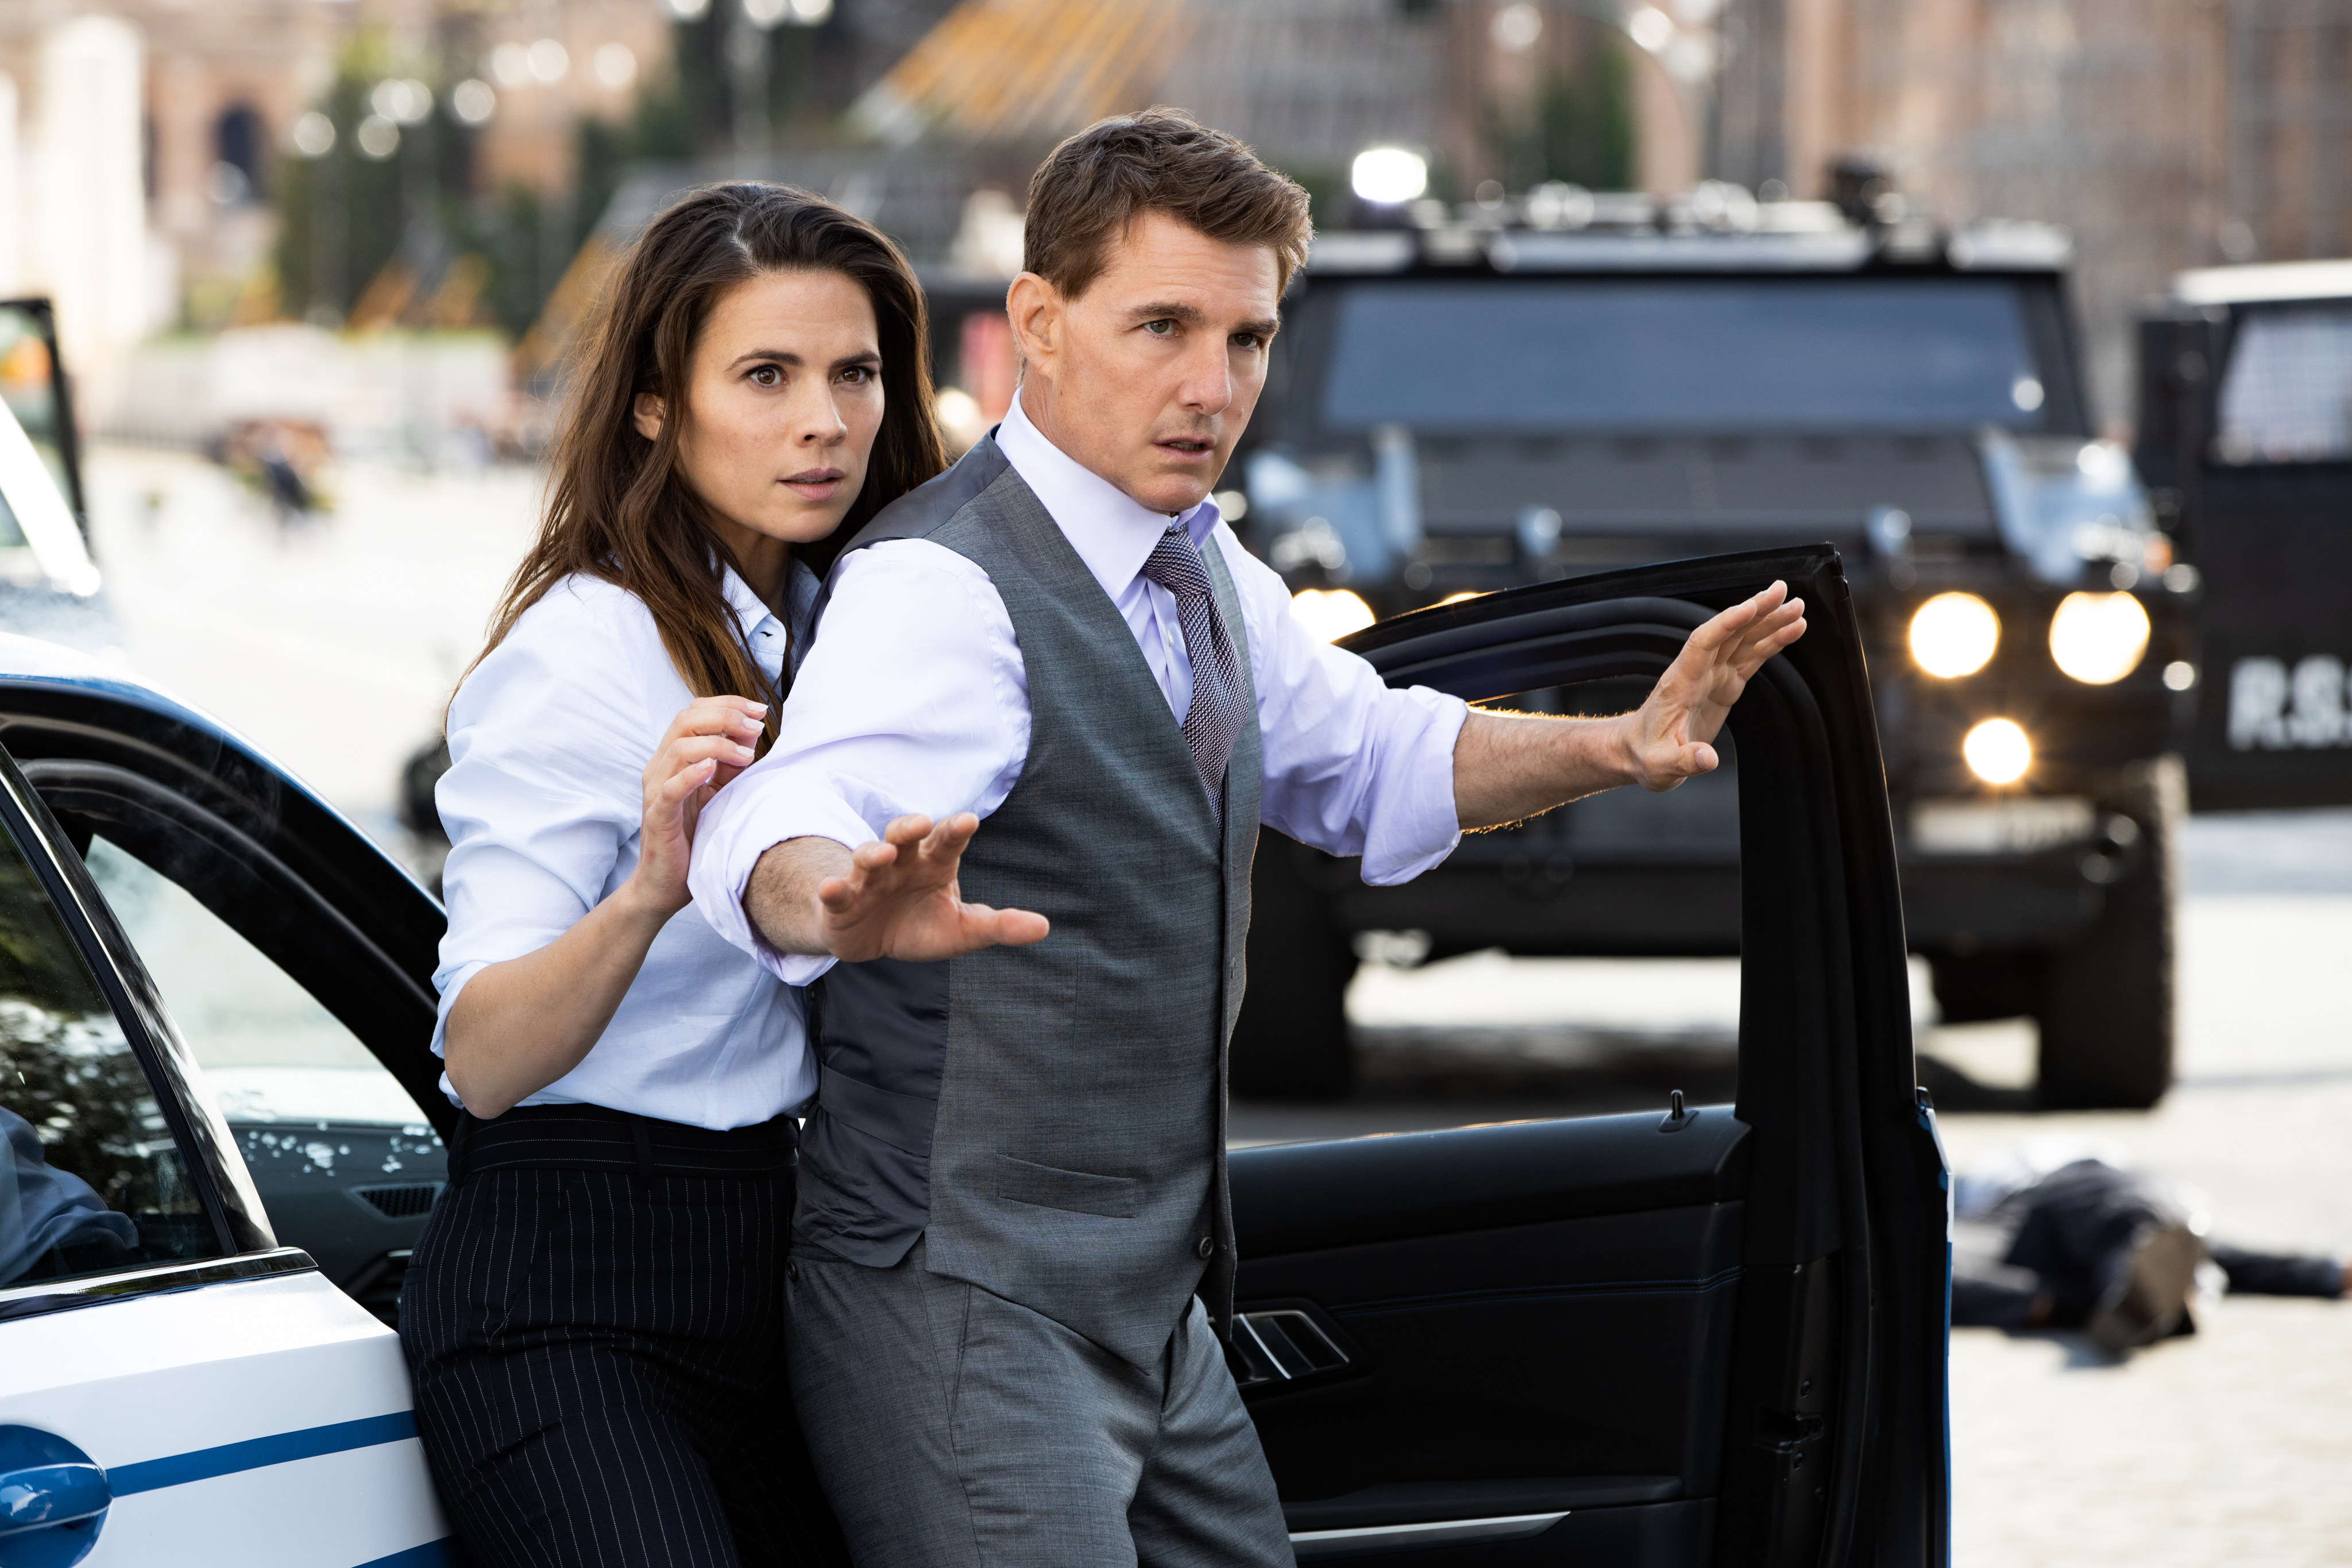 Hayley Atwell (left) and Tom Cruise in a still from “Mission: Impossible – Dead Reckoning Part One”. Photo: Christian Black/Paramount Pictures and Skydance